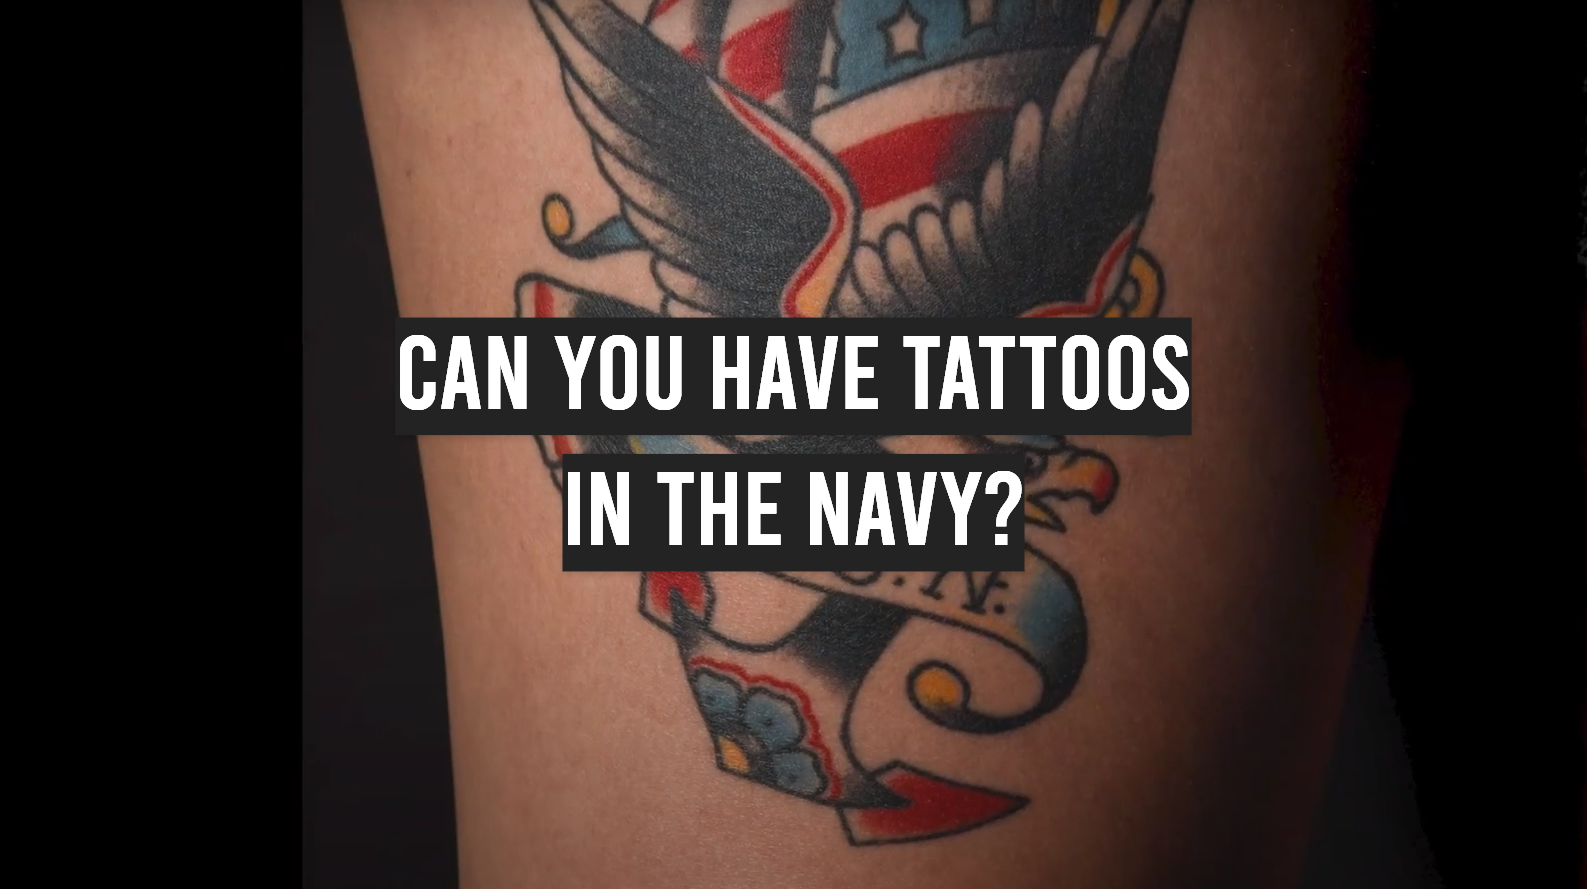 Can You Have Tattoos in the Navy?